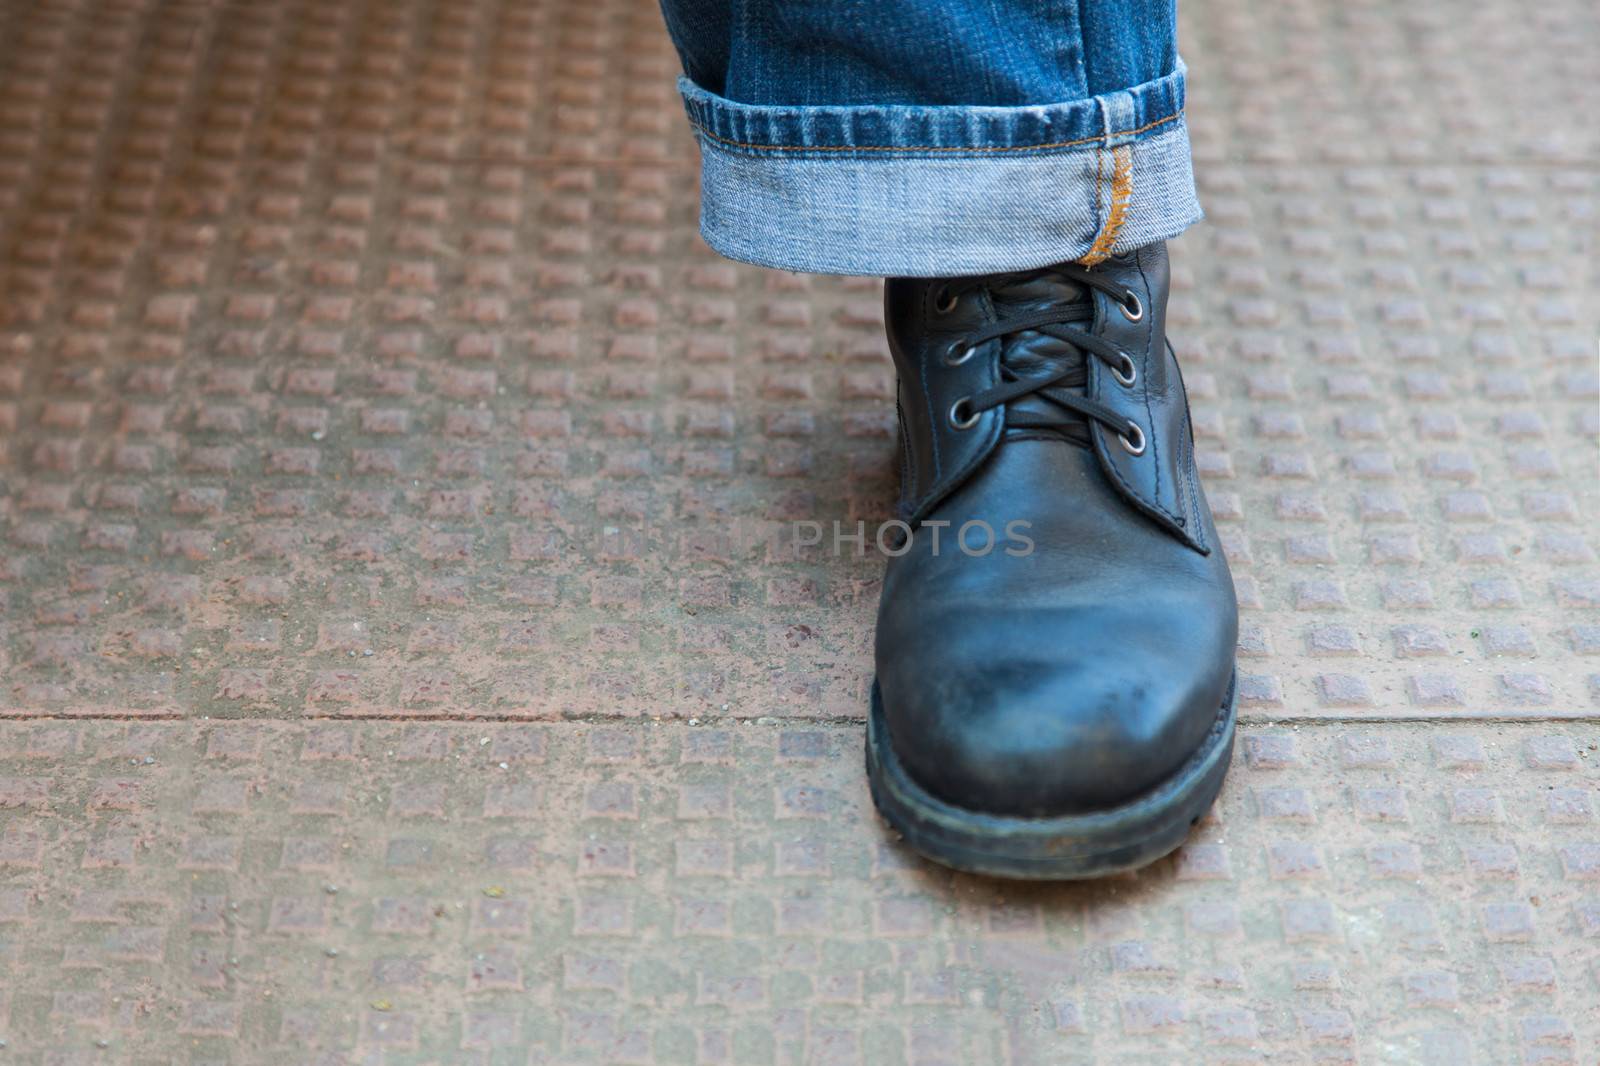 Horizontal color landscape of trendy laced up leather boots and stylish turned up denim jeans on a stippled tiled ground. Generic shot of global appeal shot in Bombay India